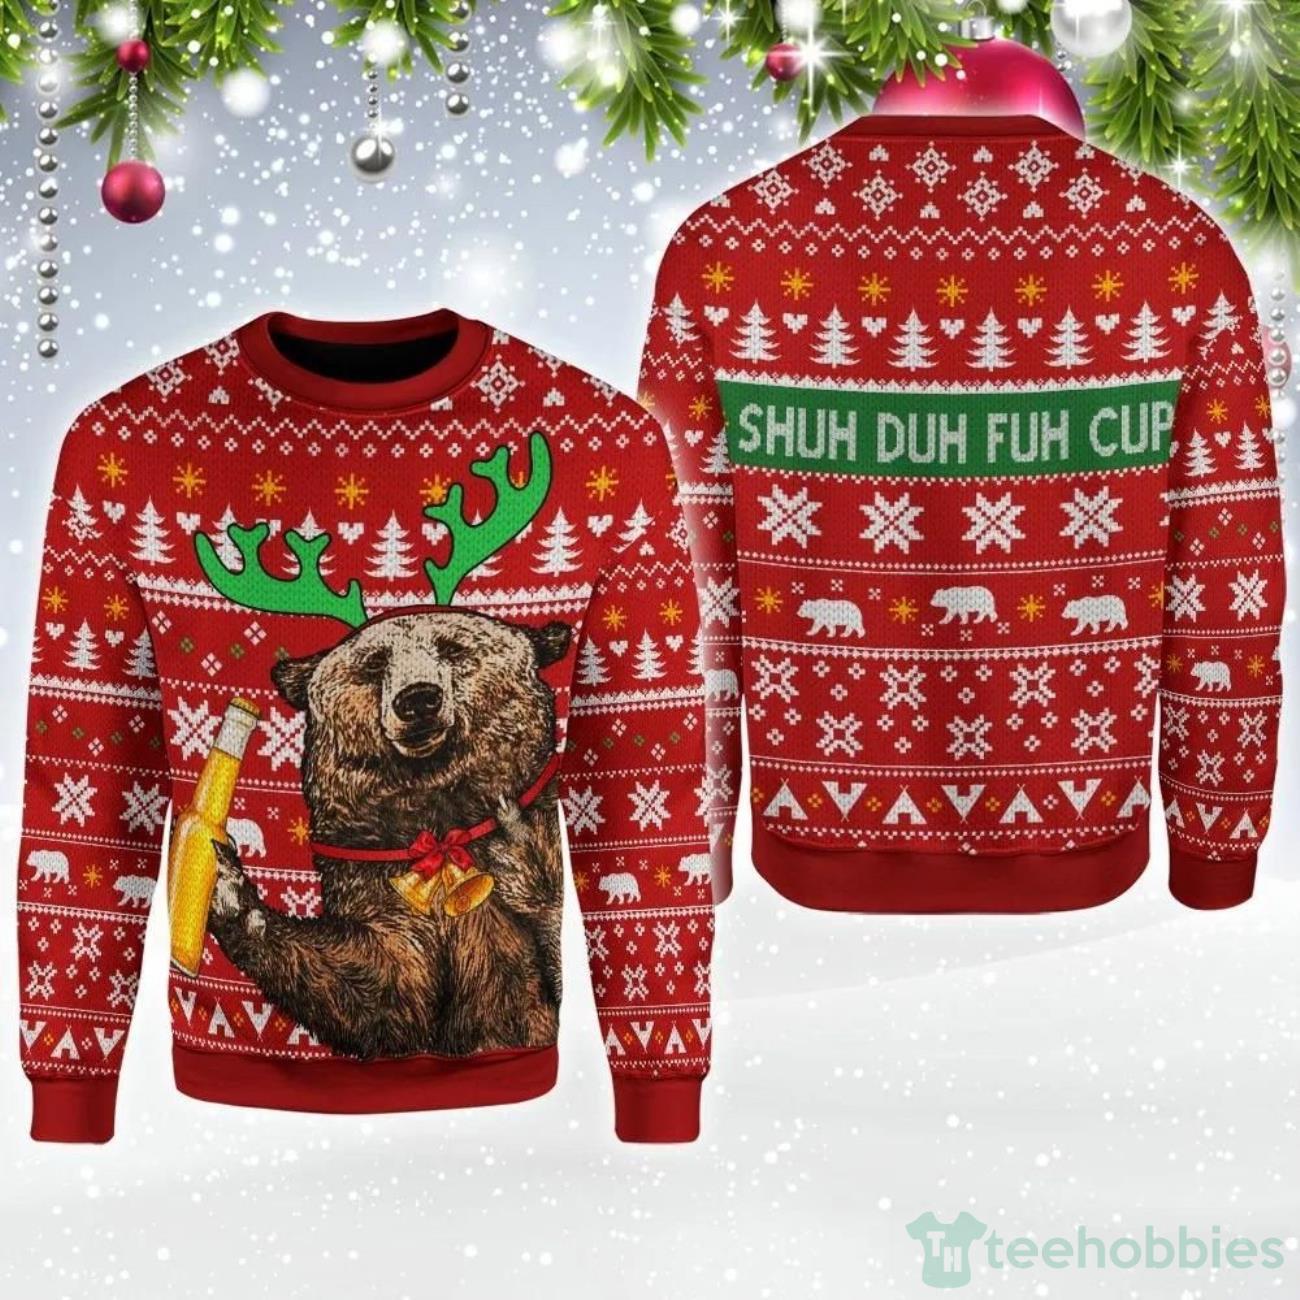 Bear Beer Shud Duh Fuh Cup Ugly Sweater For Christmas Product Photo 1